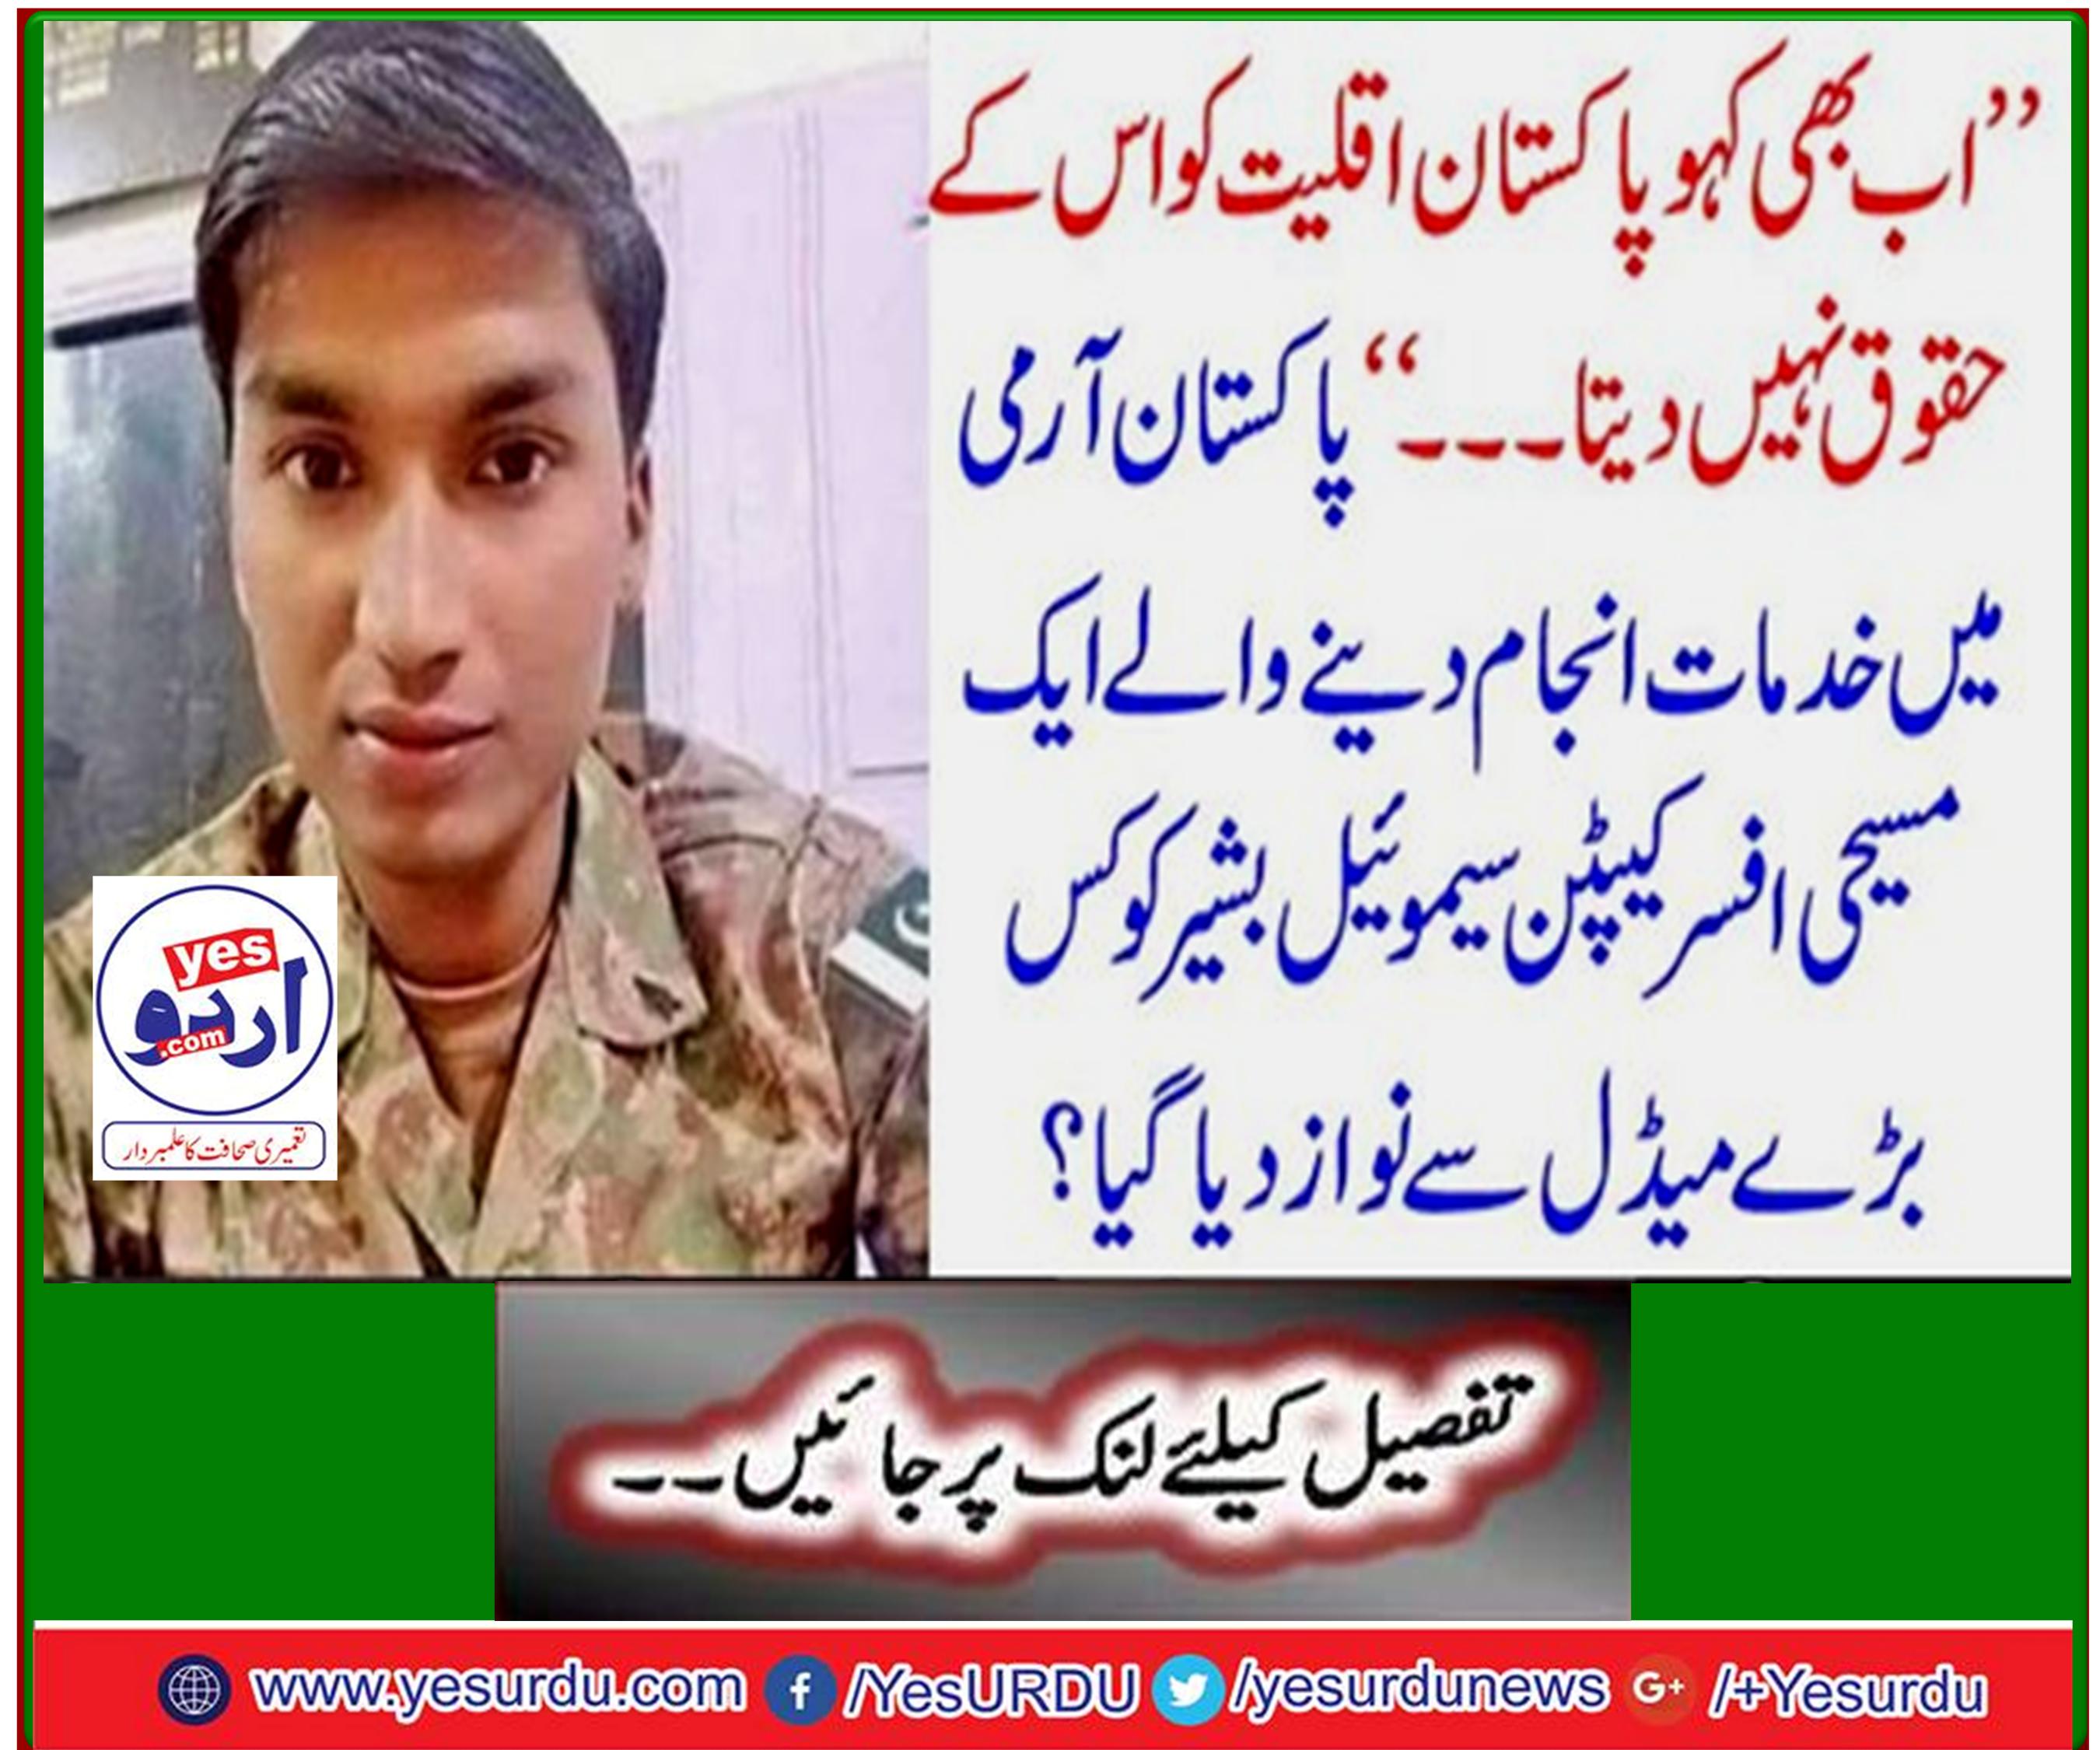 'Capt. Samuel Bashir, a Christian officer serving in the Pakistan Army, was awarded with which major medal?